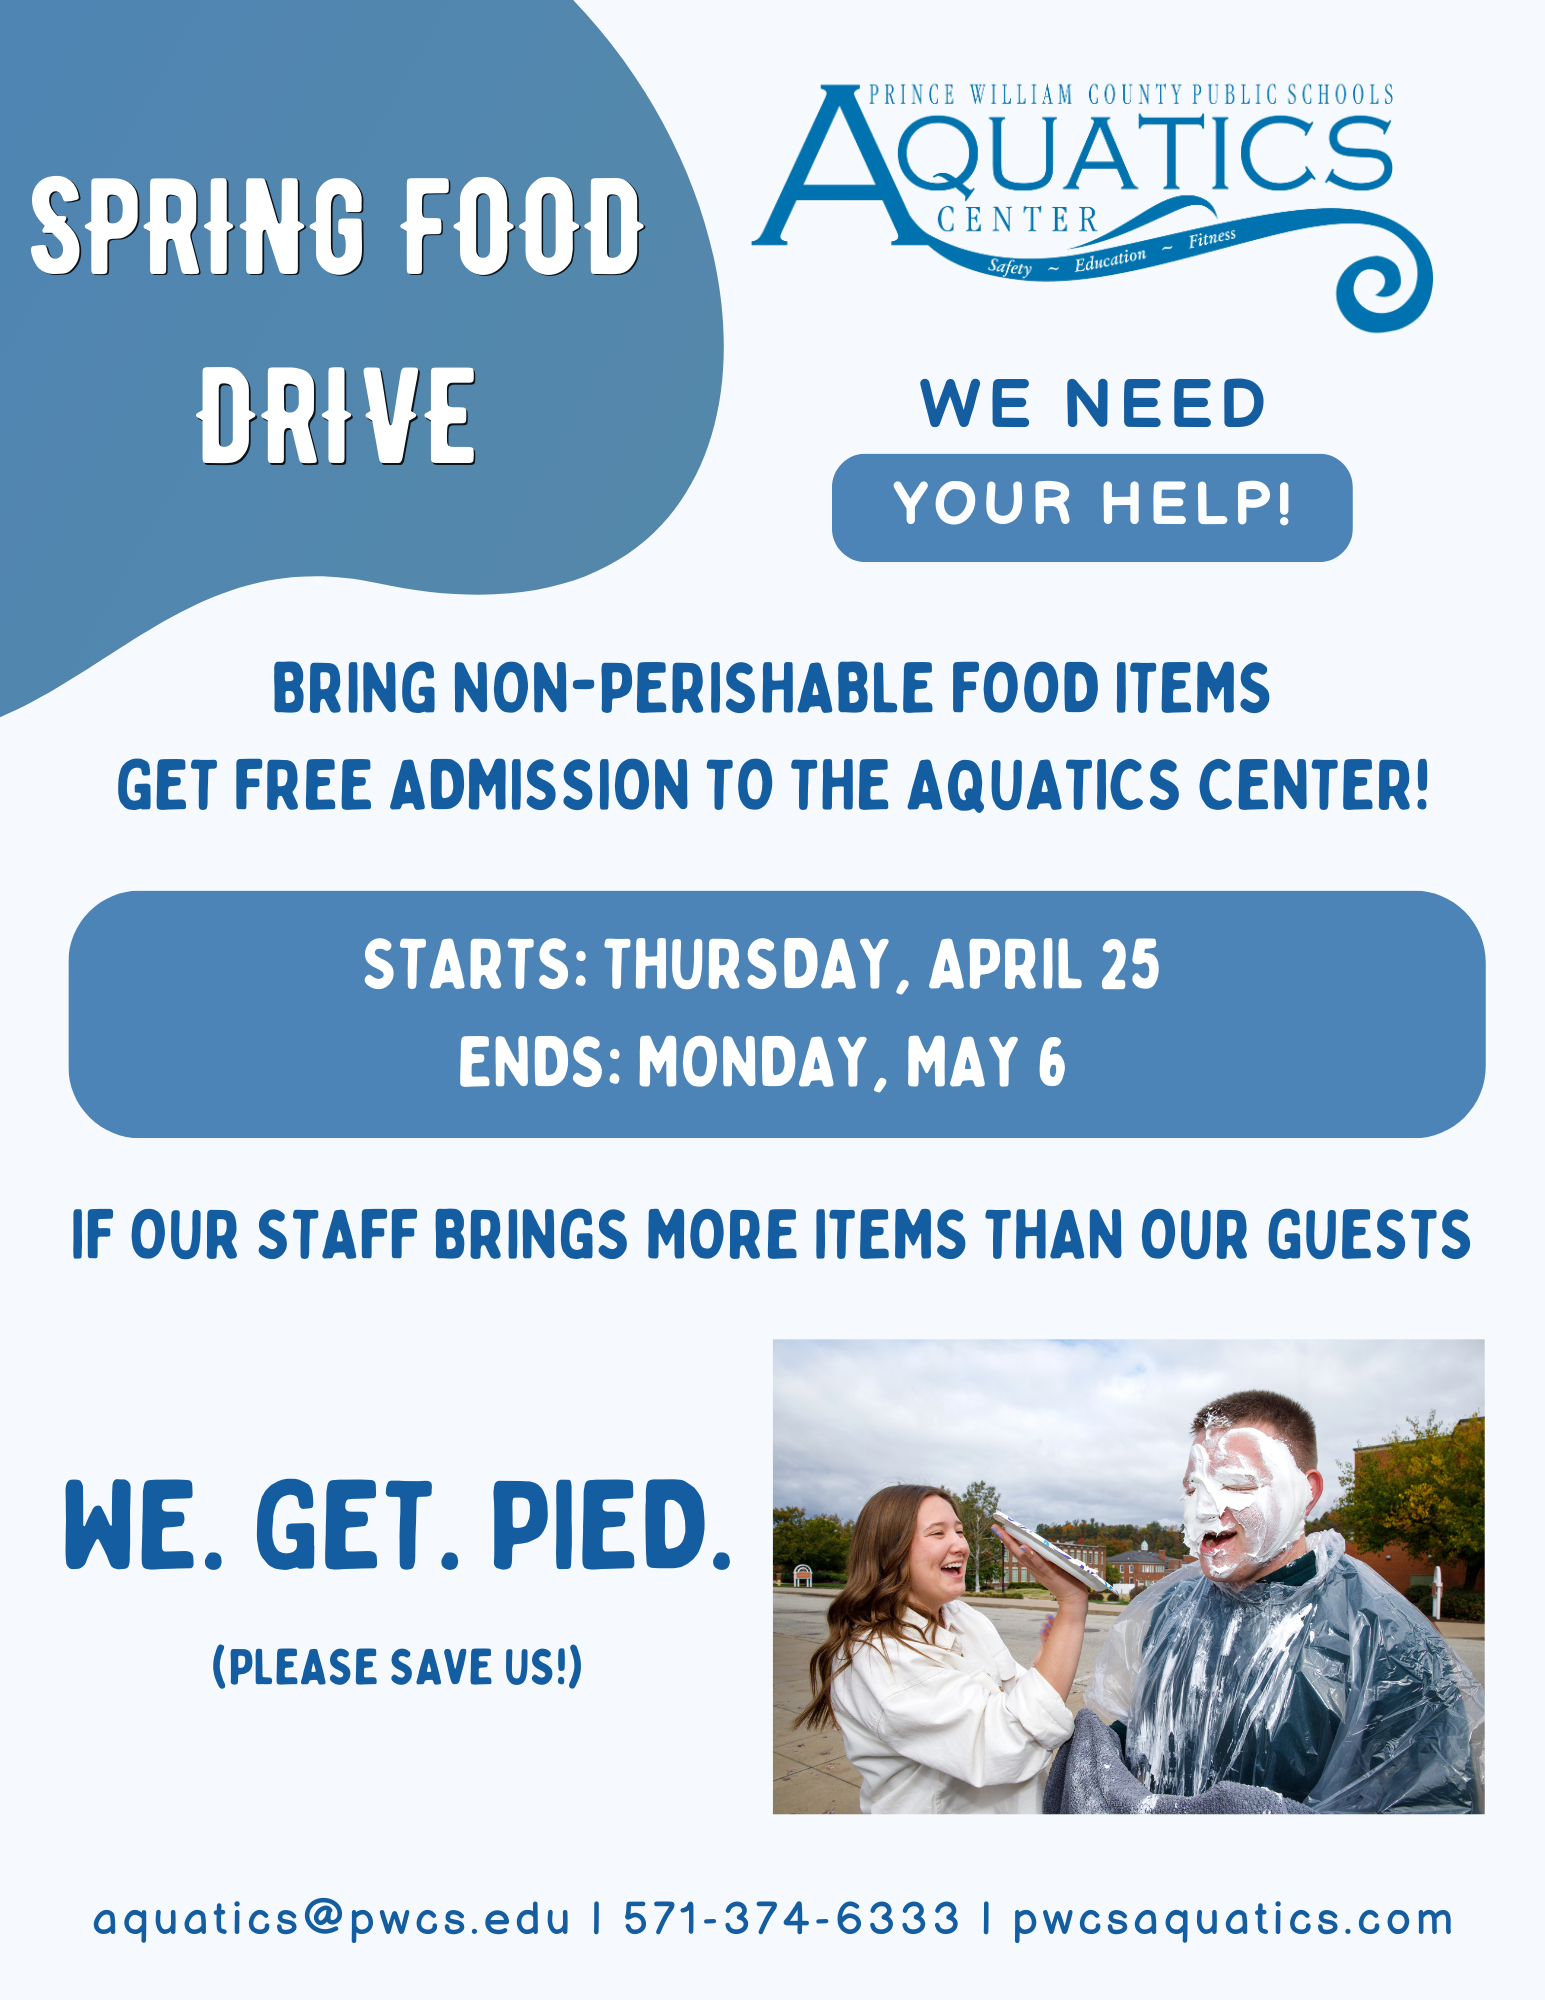 Flyer with information about the spring food drive at the PWCS Aquatics Center running from April 26 to May 6. Guests bringing a non-perishable food item will receive free entry to the Aquatics Center. Photo of a person being hit in the face with a pie.